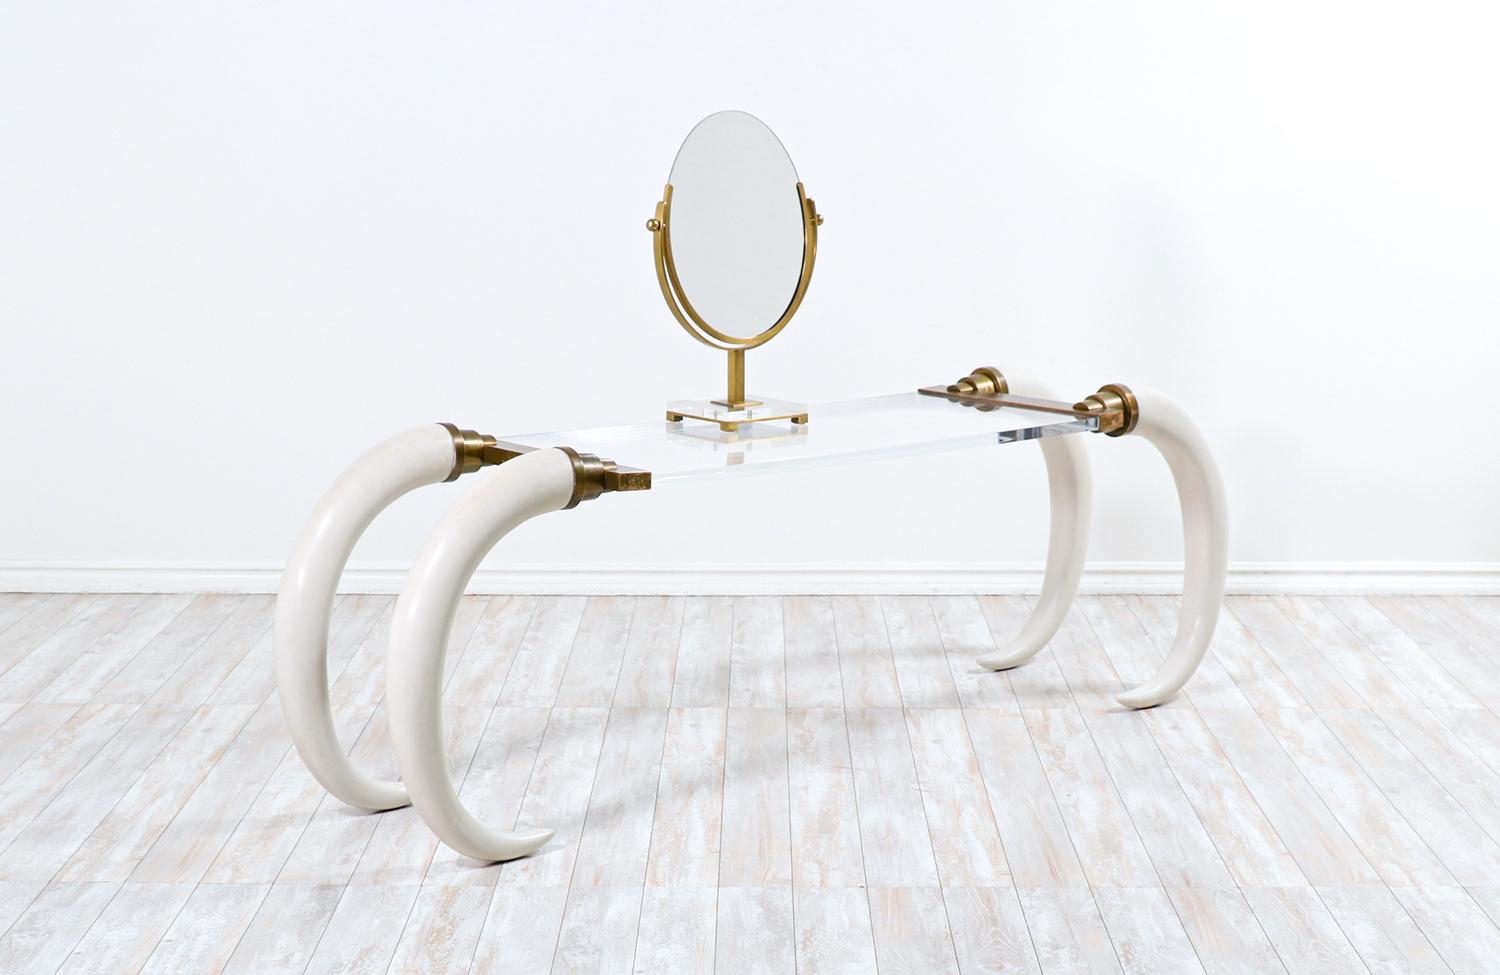 1970s modernist faux elephant tusk brass & lucite console table.

________________________________________

Transforming a piece of Mid-Century Modern furniture is like bringing history back to life, and we take this journey with passion and